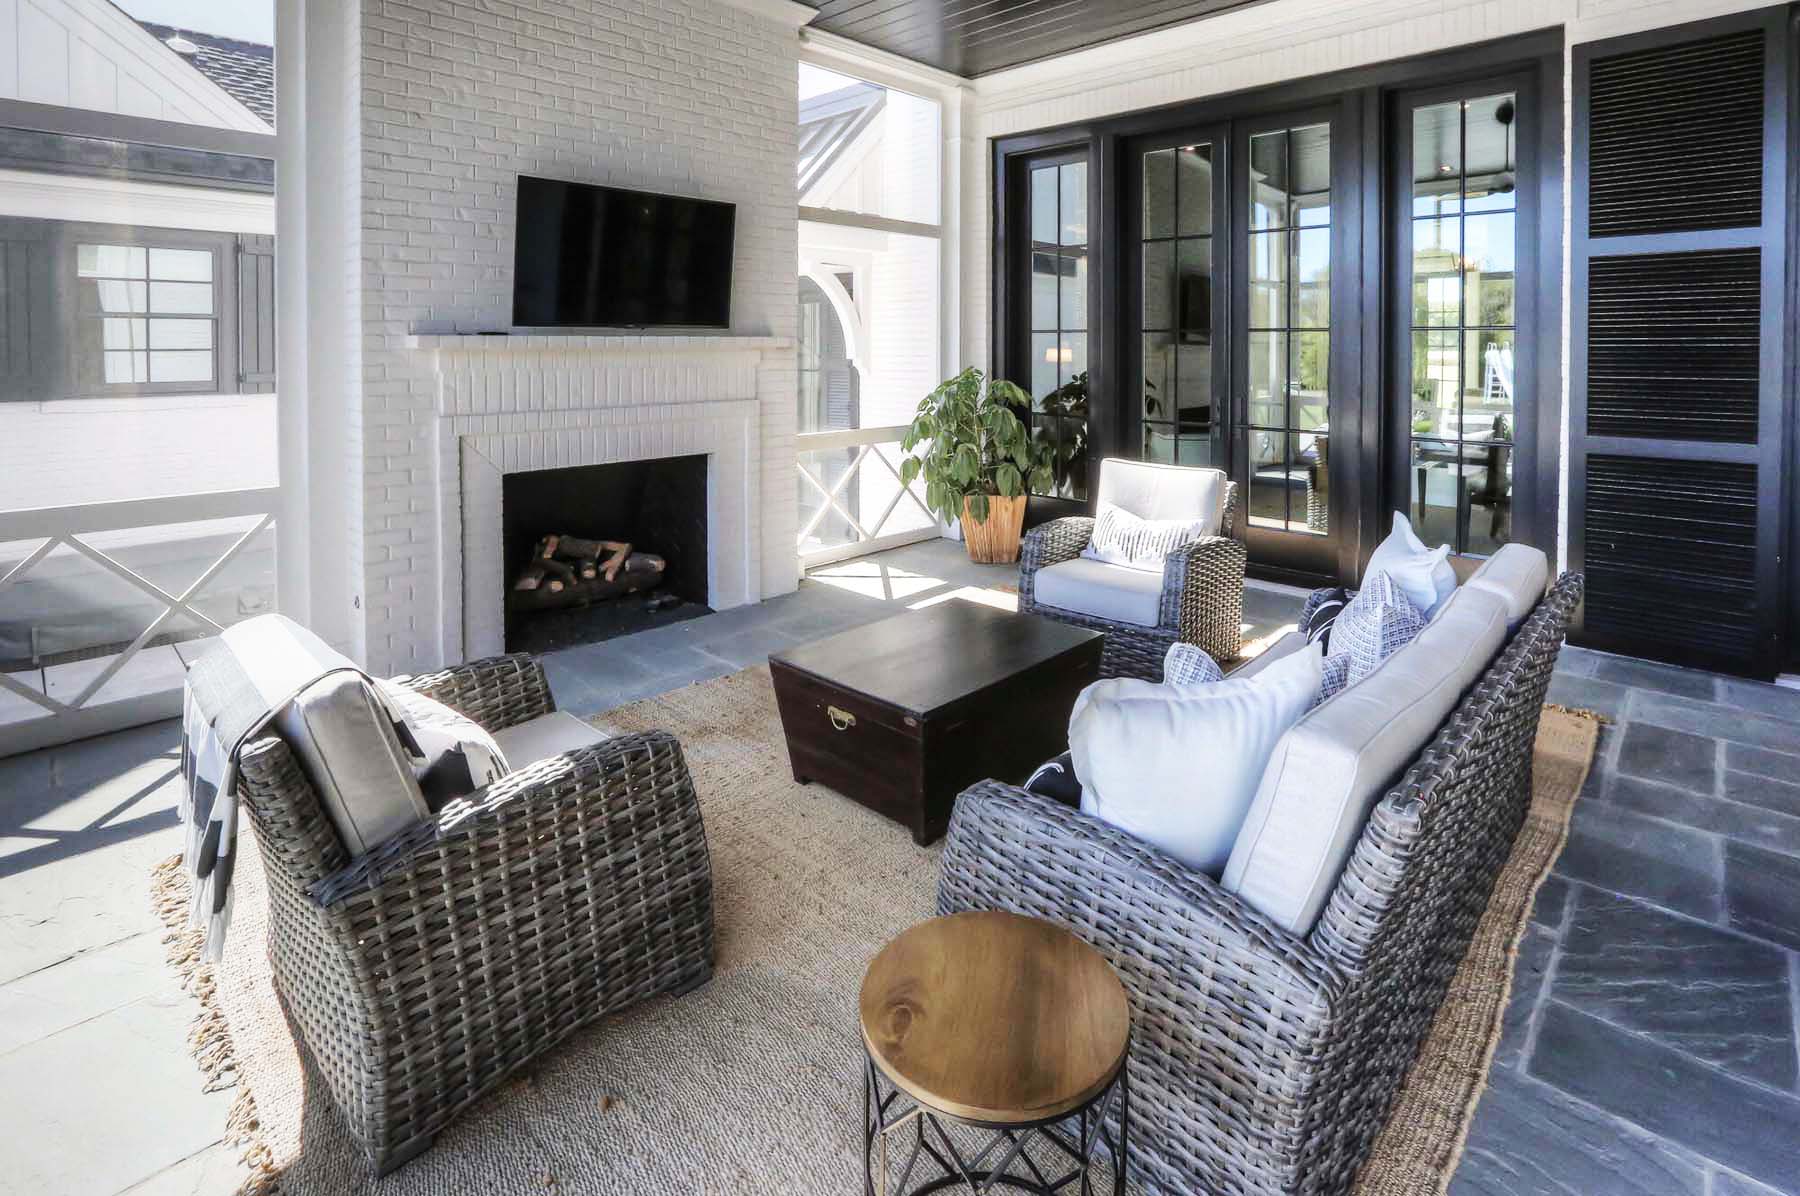 red brick outdoor fireplace painted white with TV mounted above